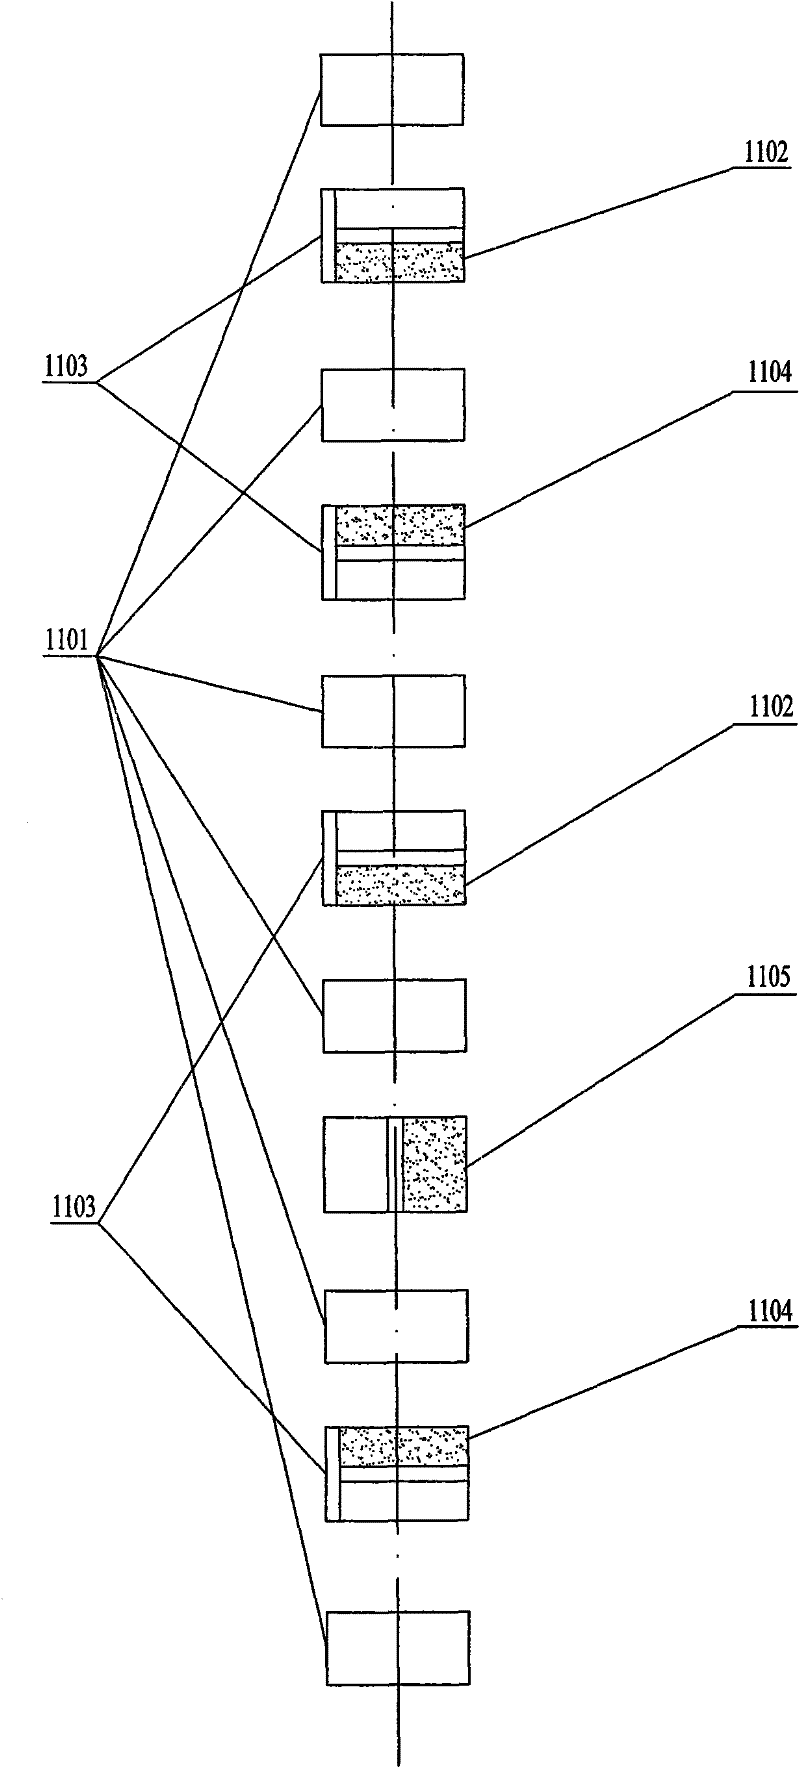 Method for jointly controlling emission of NOx by utilizing multi-stage bias combustion and fuel reburning